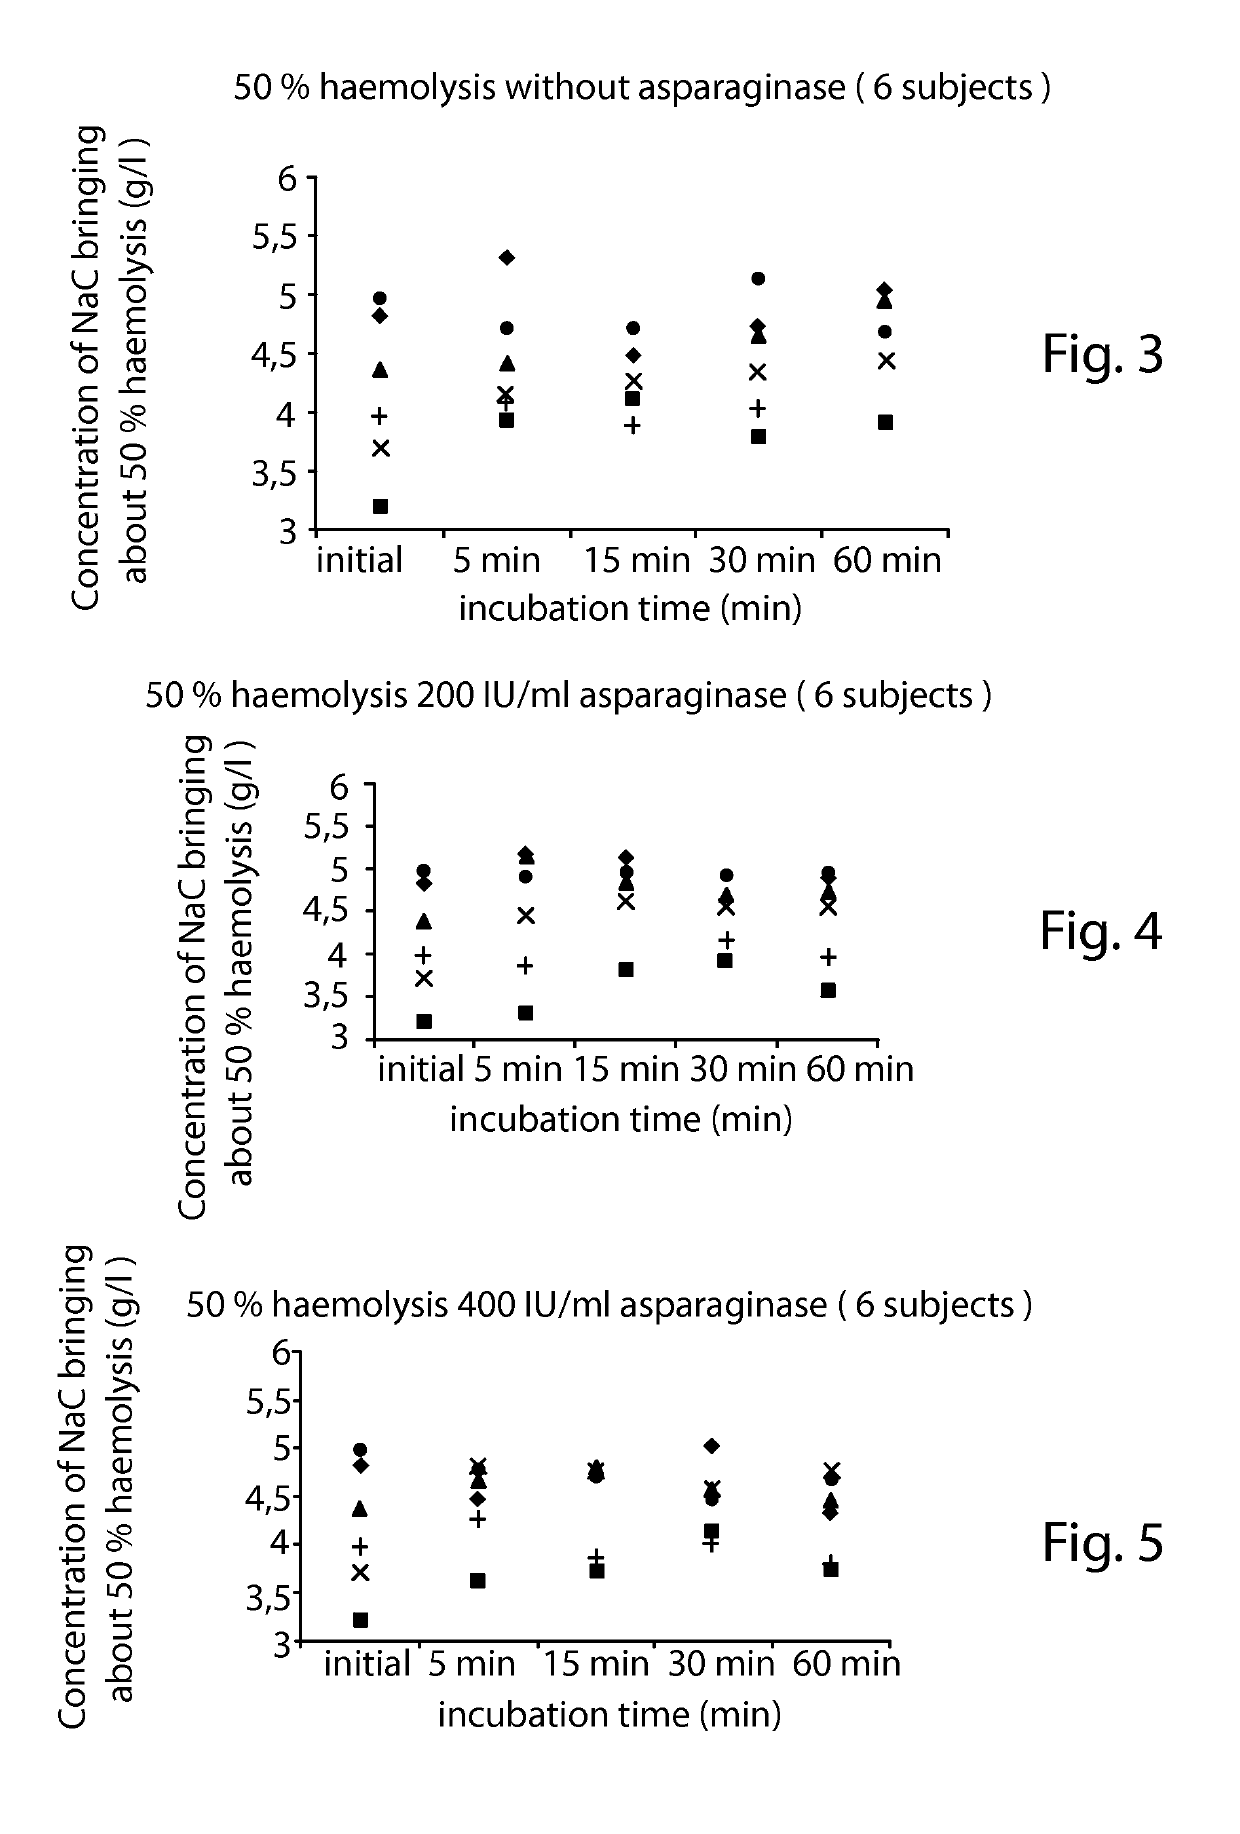 Lysis/resealing process and device for incorporating an active ingredient, in particular asparaginase or inositol hexaphosphate, in erythrocytes